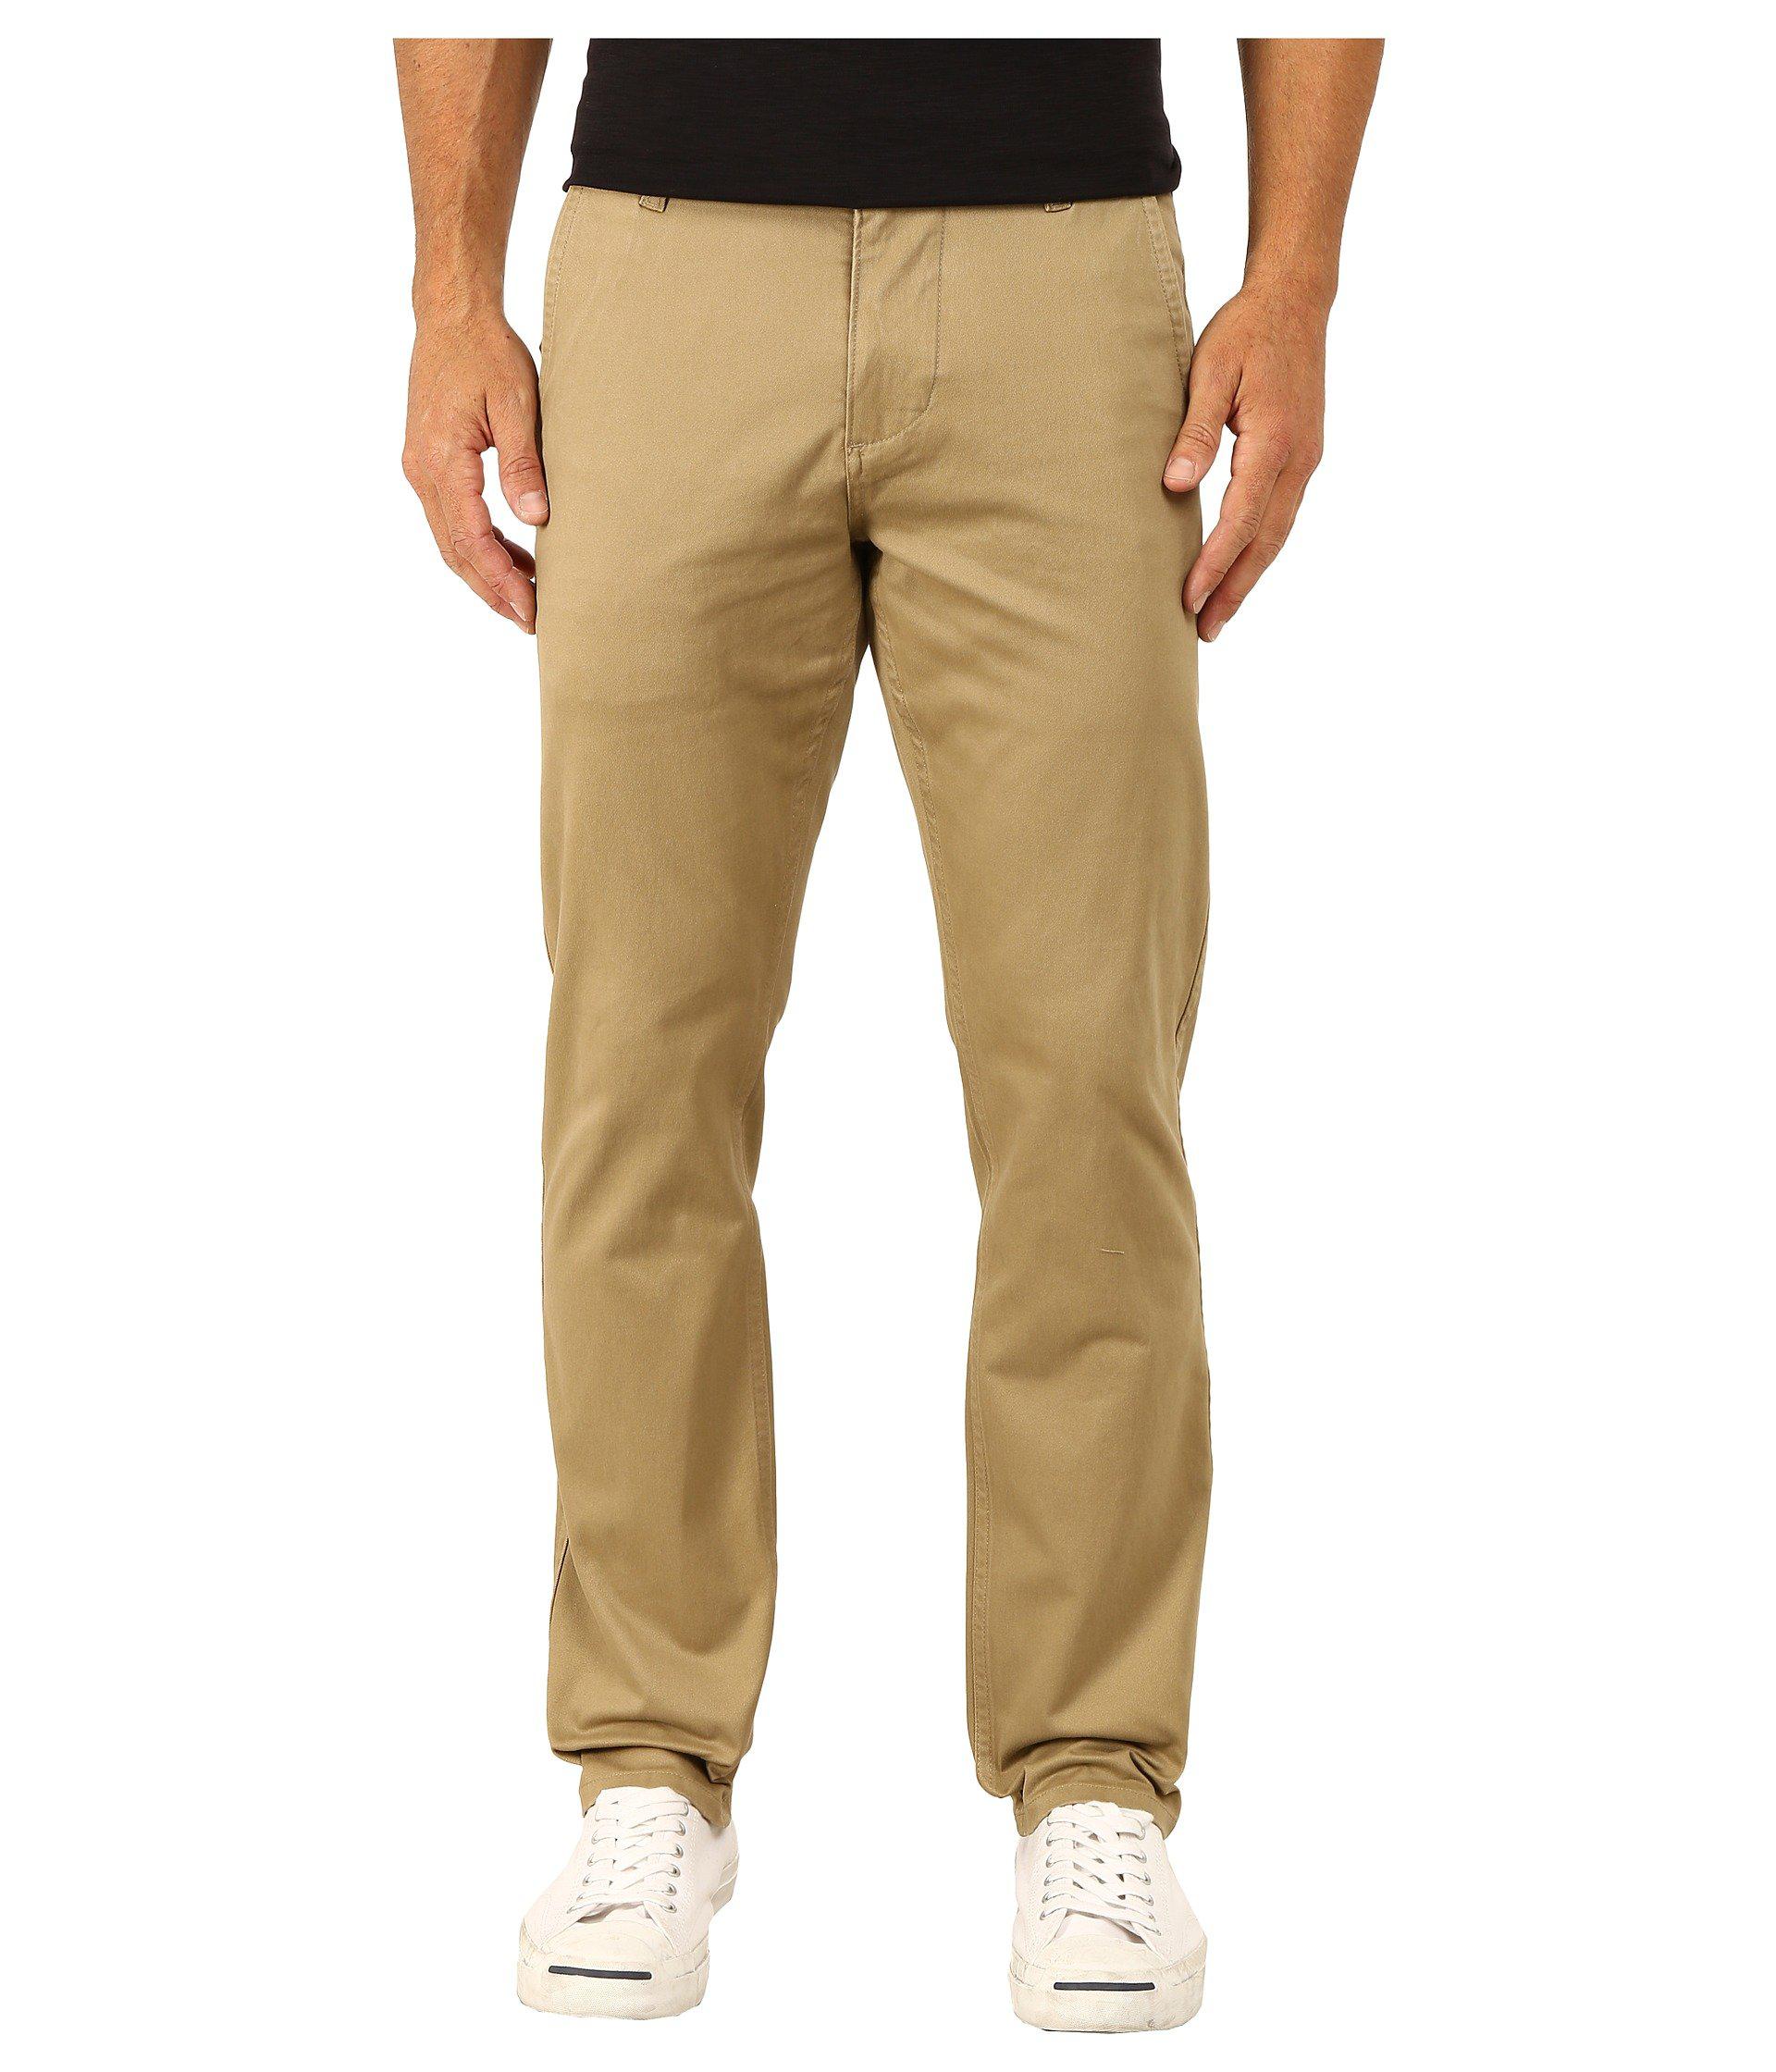 Lyst - Dockers Alpha Khaki Stretch Slim Tapered in Natural for Men